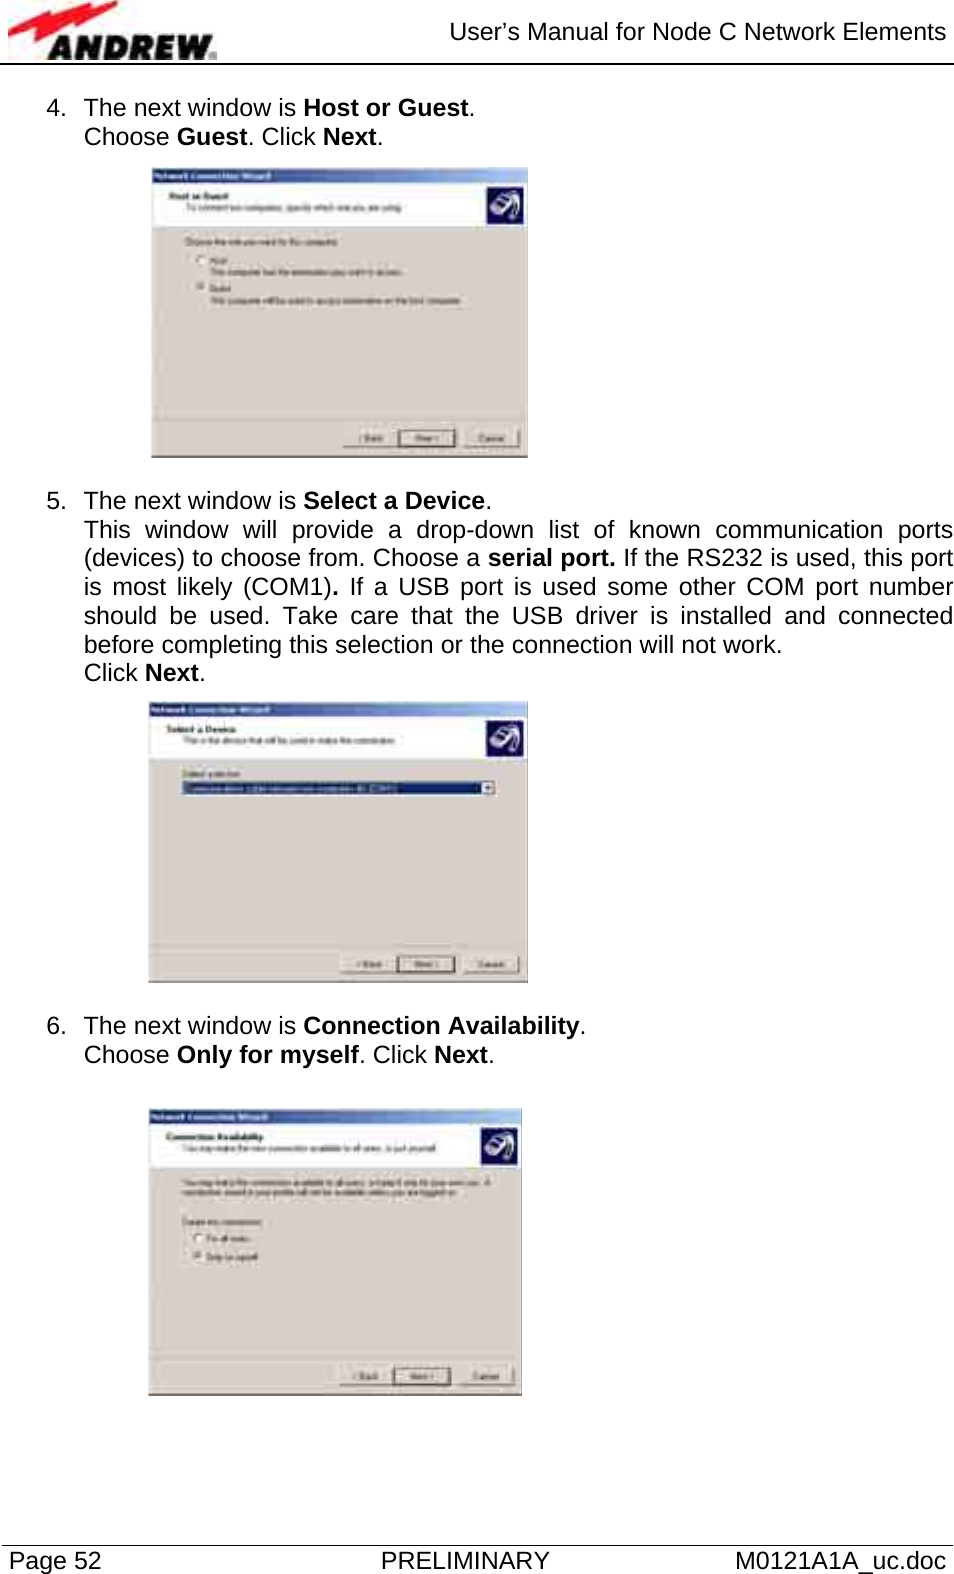  User’s Manual for Node C Network Elements Page 52  PRELIMINARY M0121A1A_uc.doc 4.  The next window is Host or Guest.  Choose Guest. Click Next.  5.  The next window is Select a Device. This window will provide a drop-down list of known communication ports (devices) to choose from. Choose a serial port. If the RS232 is used, this port is most likely (COM1). If a USB port is used some other COM port number should be used. Take care that the USB driver is installed and connected before completing this selection or the connection will not work.  Click Next.  6.  The next window is Connection Availability.  Choose Only for myself. Click Next.   